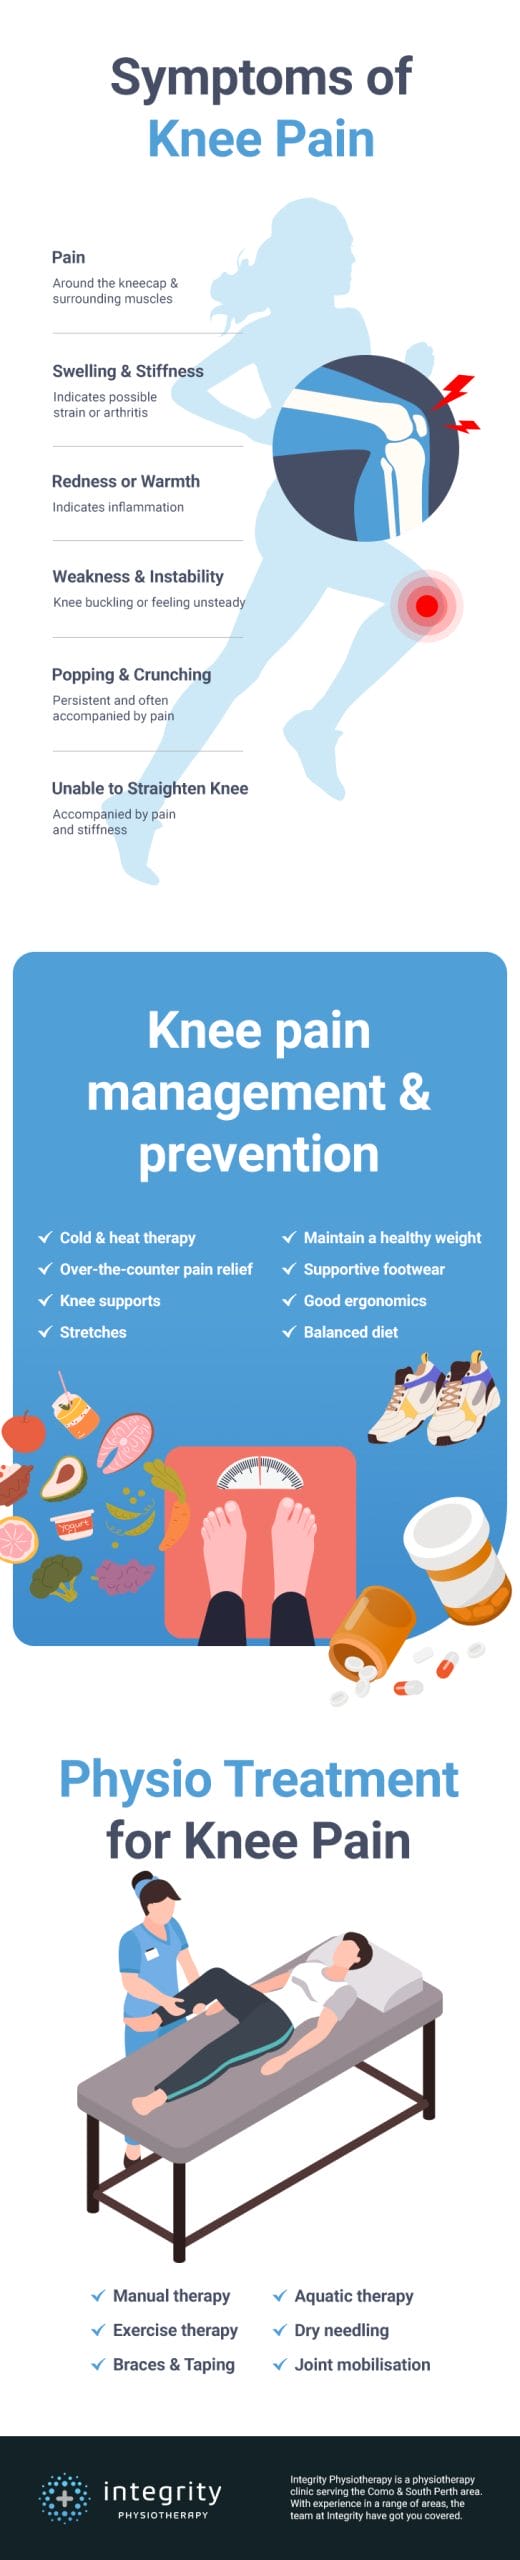 Physiotherapy treatment for knee pain infographic